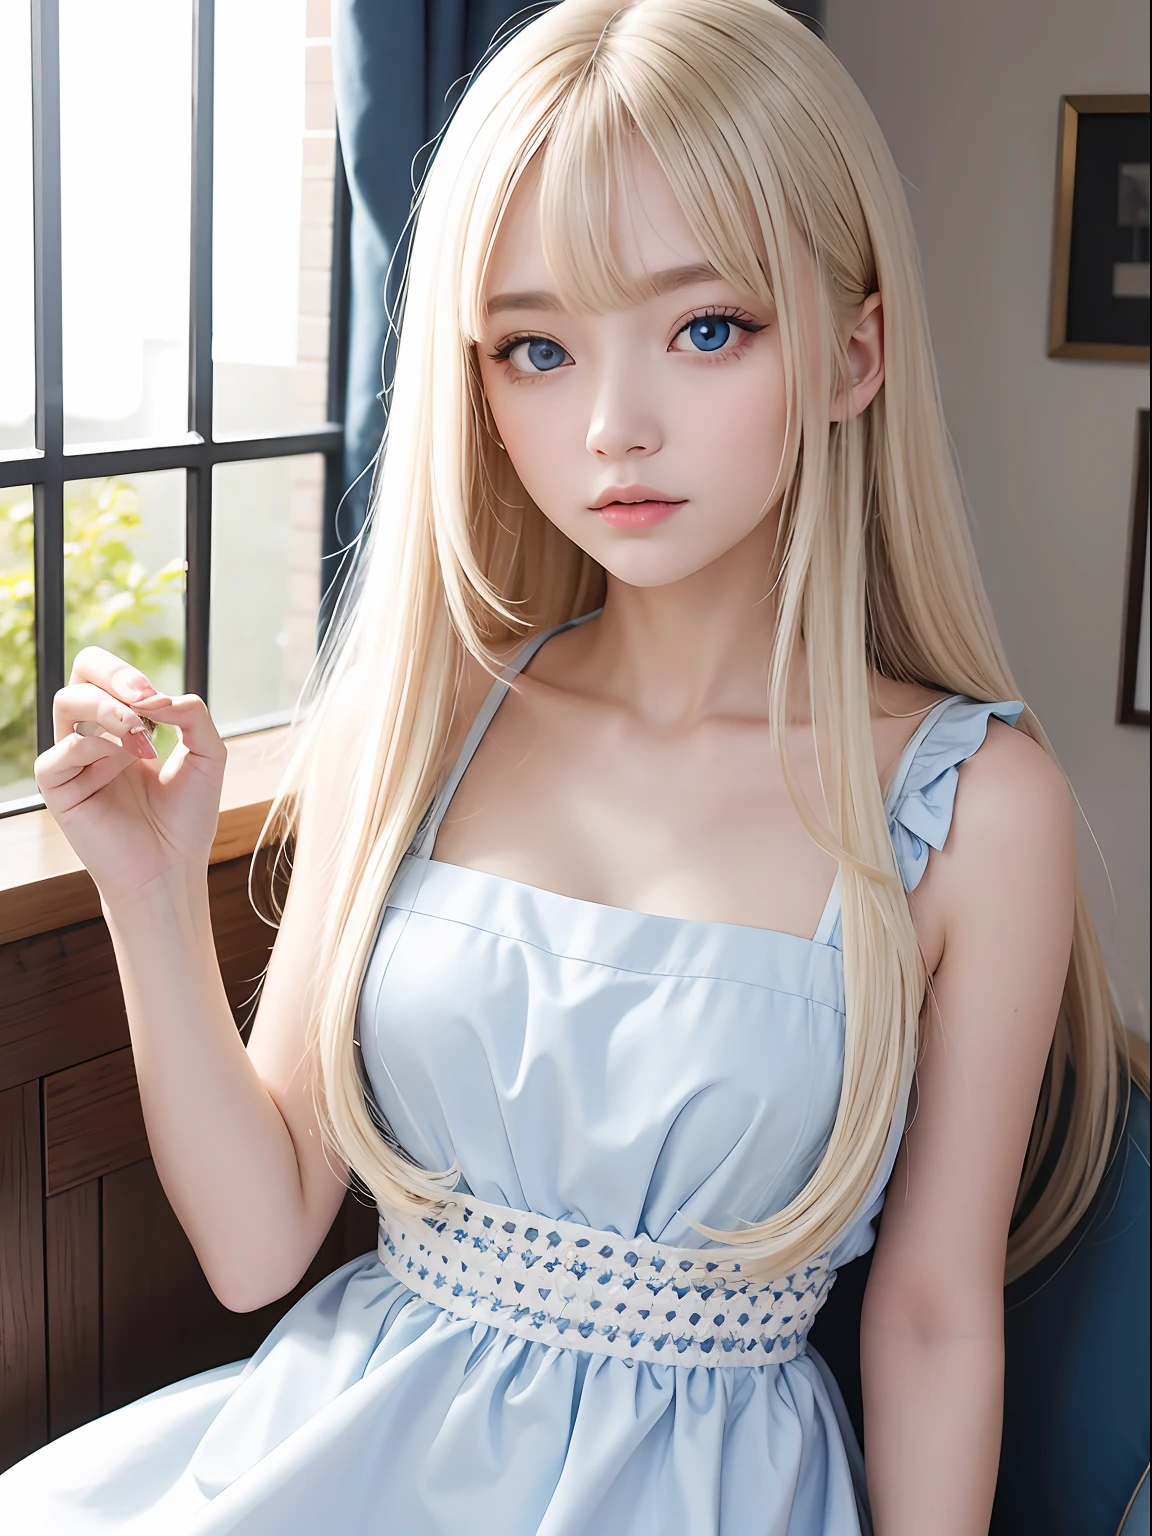 top-quality、超A high resolution、a picture、a photo of a cute girl、Detailed cute and beautiful face、(pureerosface_v1:0.008)、alice in the wonderland、13years、White shiny skin、bangss、Platinum Blonde Super Long Straight Silky Hainer hair、Attractive beautiful crystal clear big blue eyes、White Apron、a blue dress、without makeup